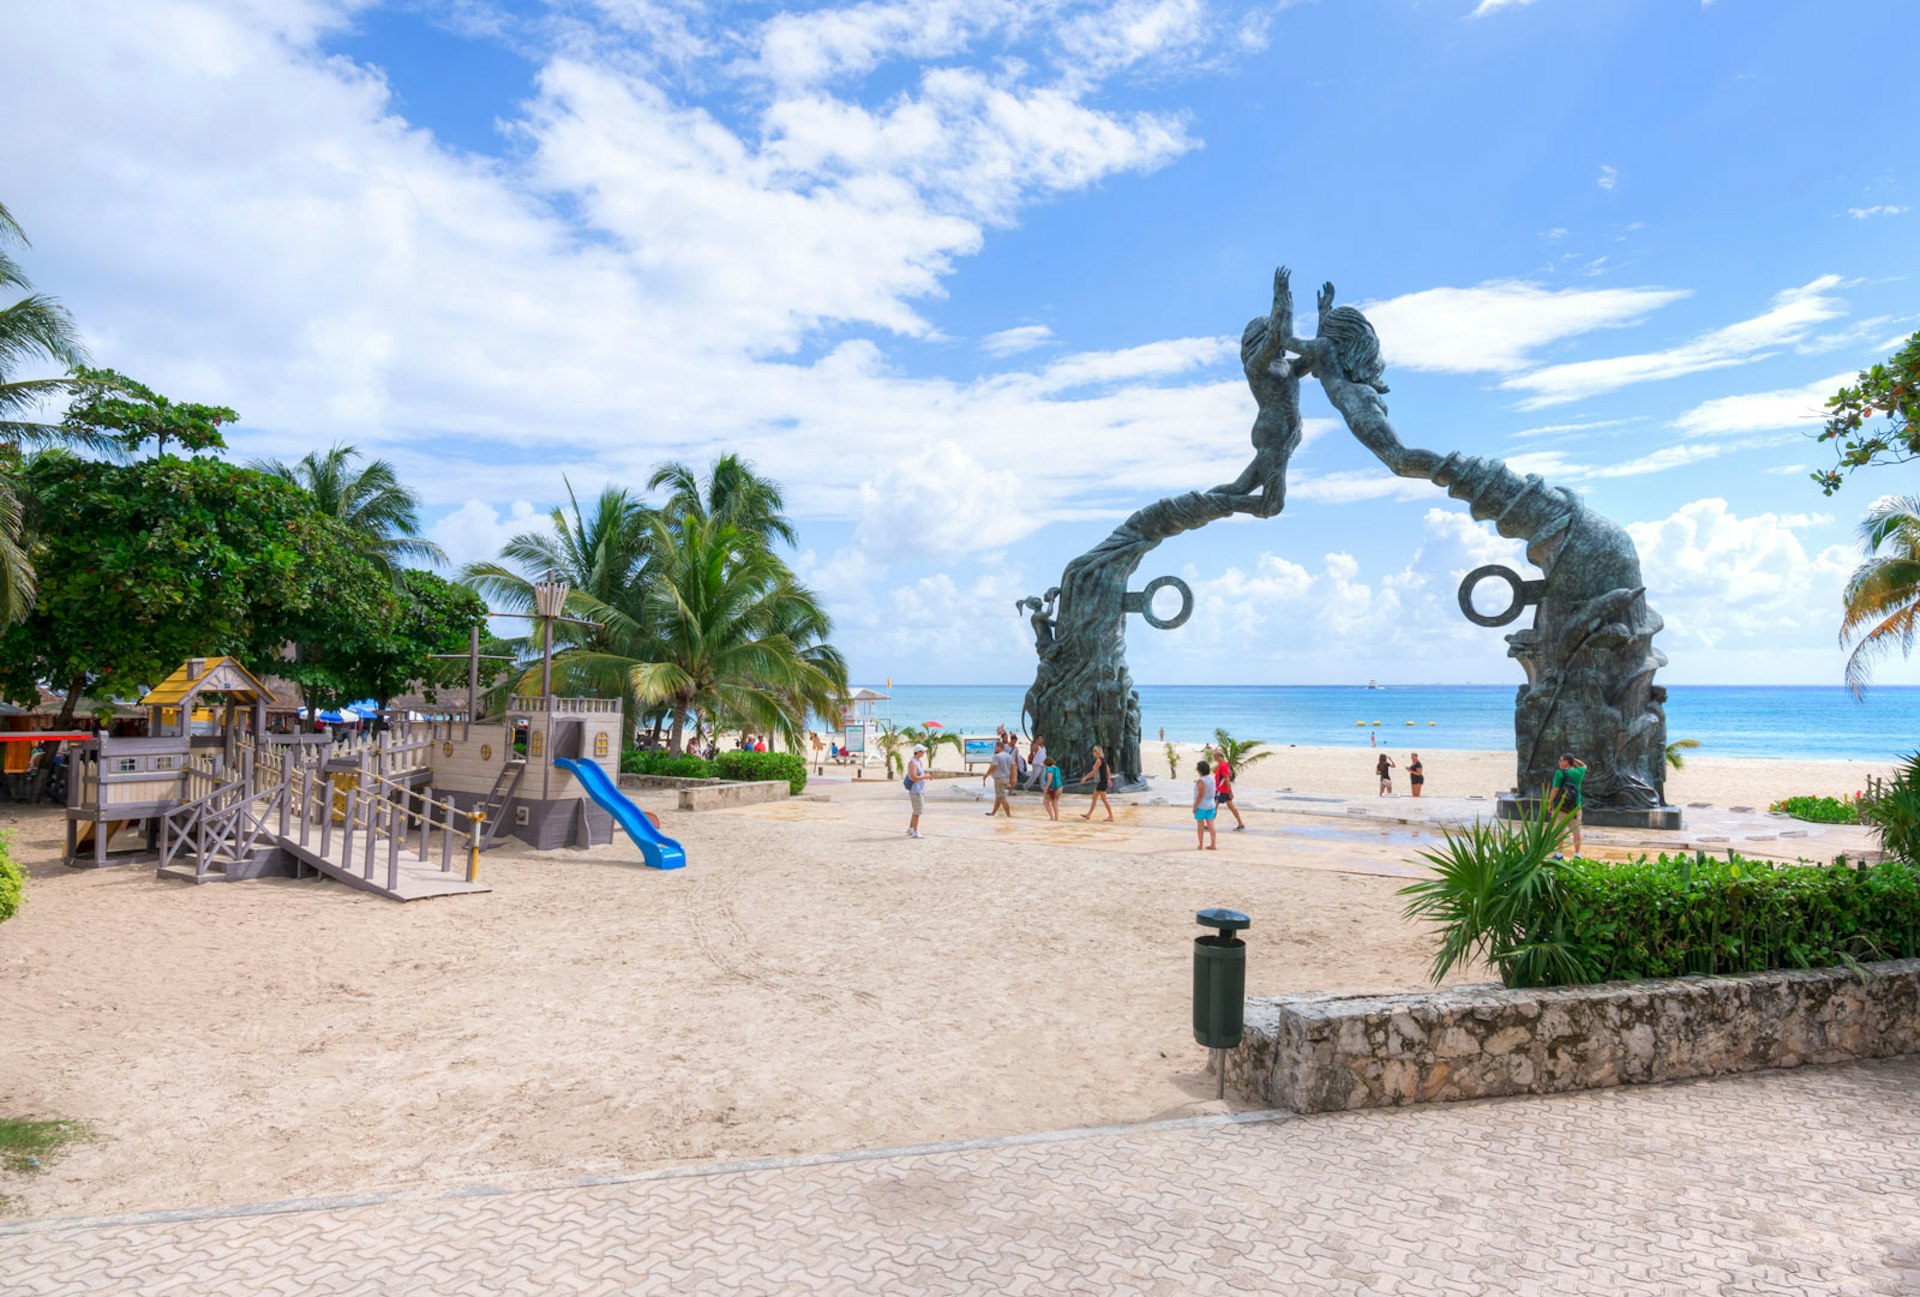 A mermaid statue serves as a gate to a pirate-themed playground on the beach